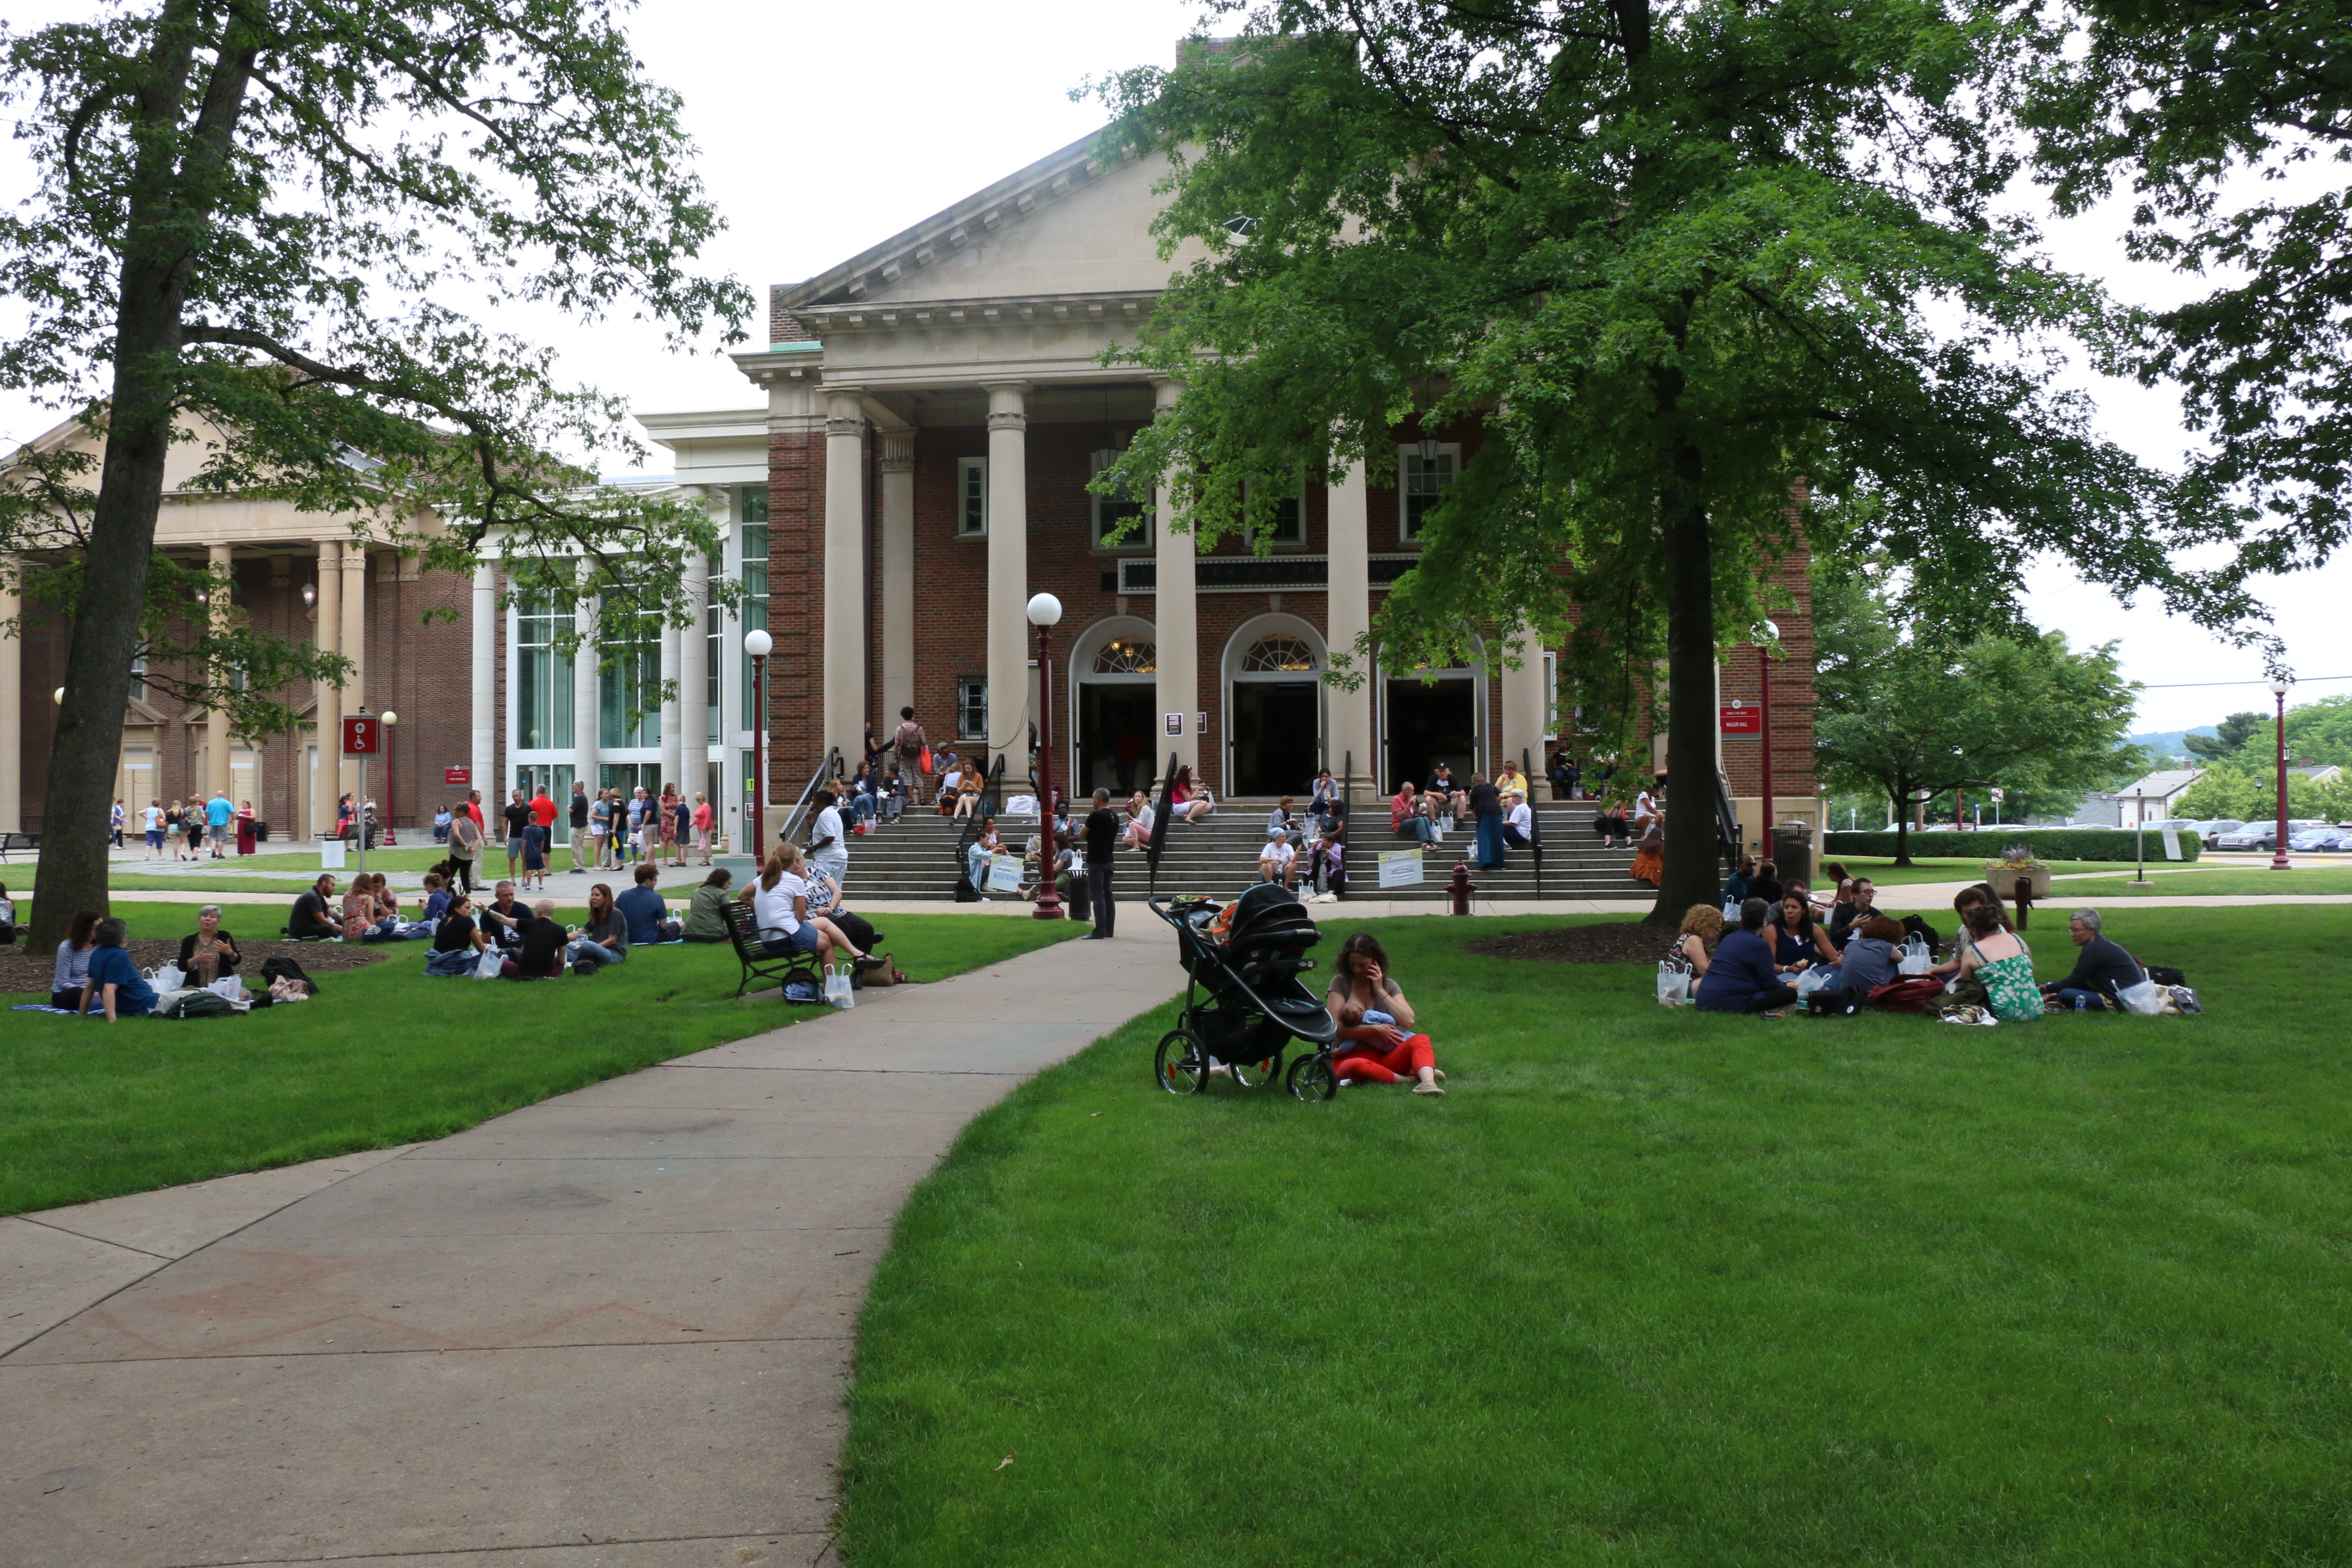 Photo of conference attendees taking a lunch break during the 2018 Conference.  Many people are sitting in the grass or on benches outside in the grassy areas surrounding the main conference building.